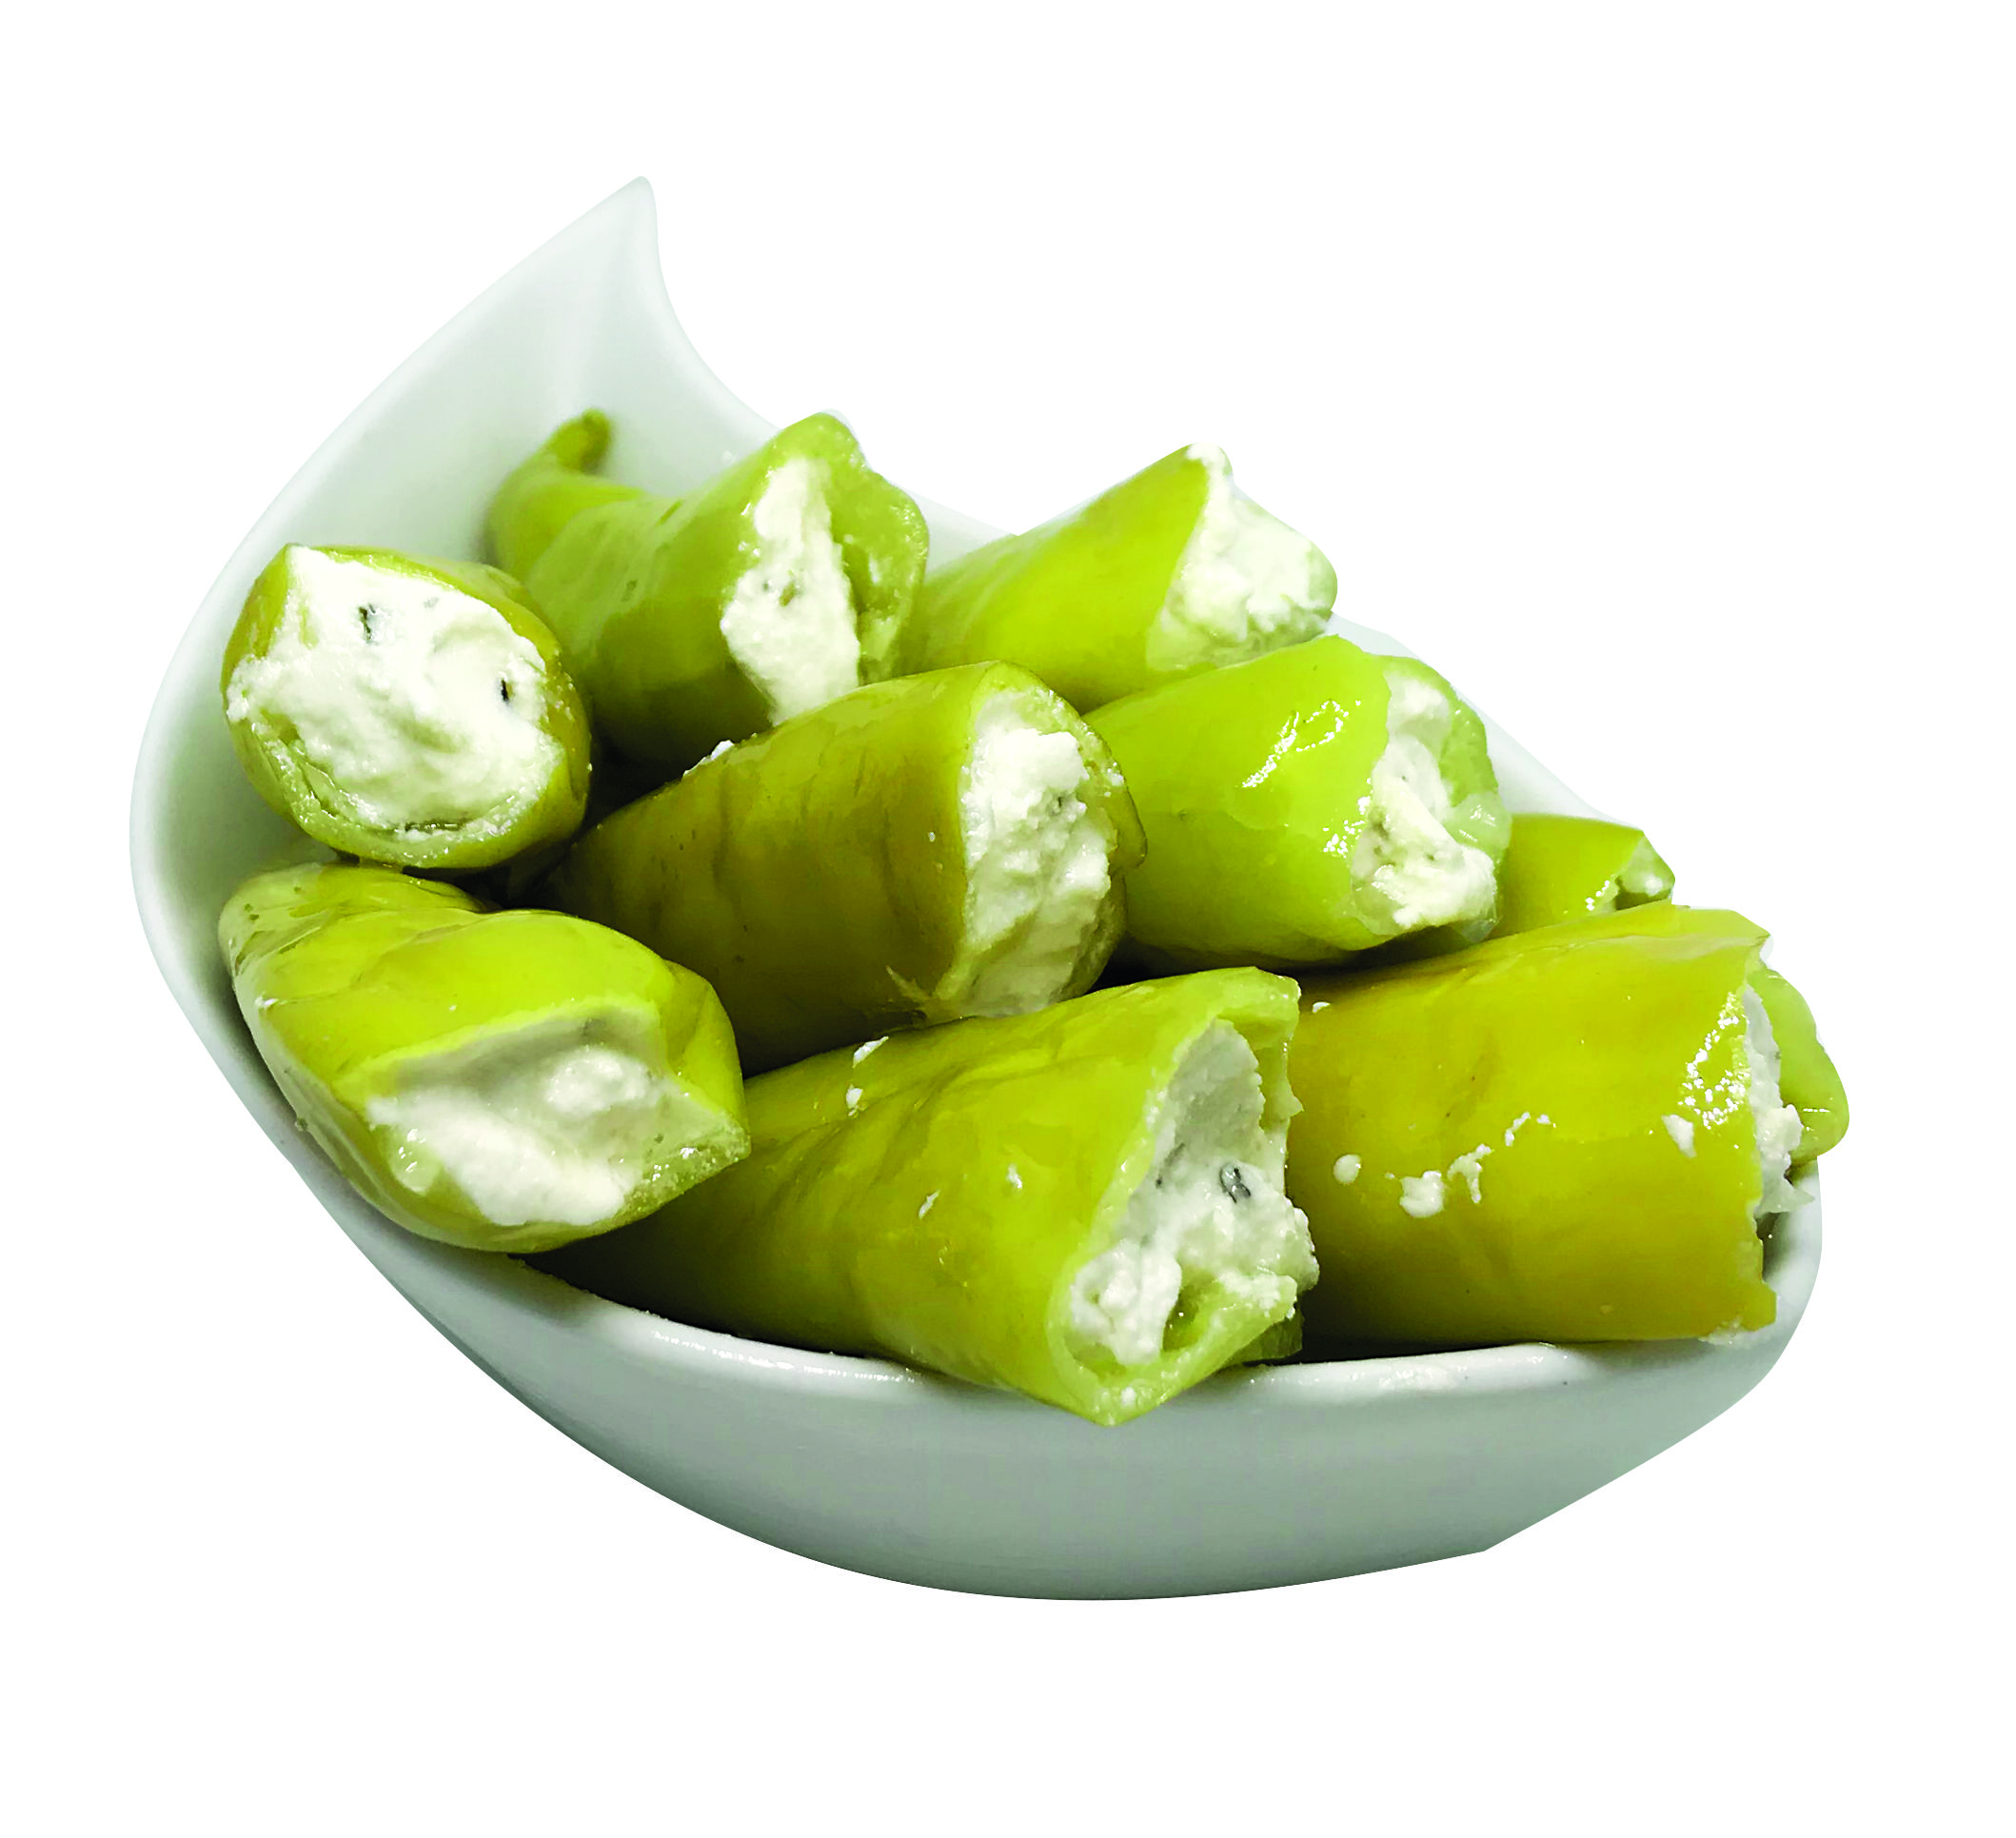 GREEN PEPPER LONG STUFFED WITH CHEESE